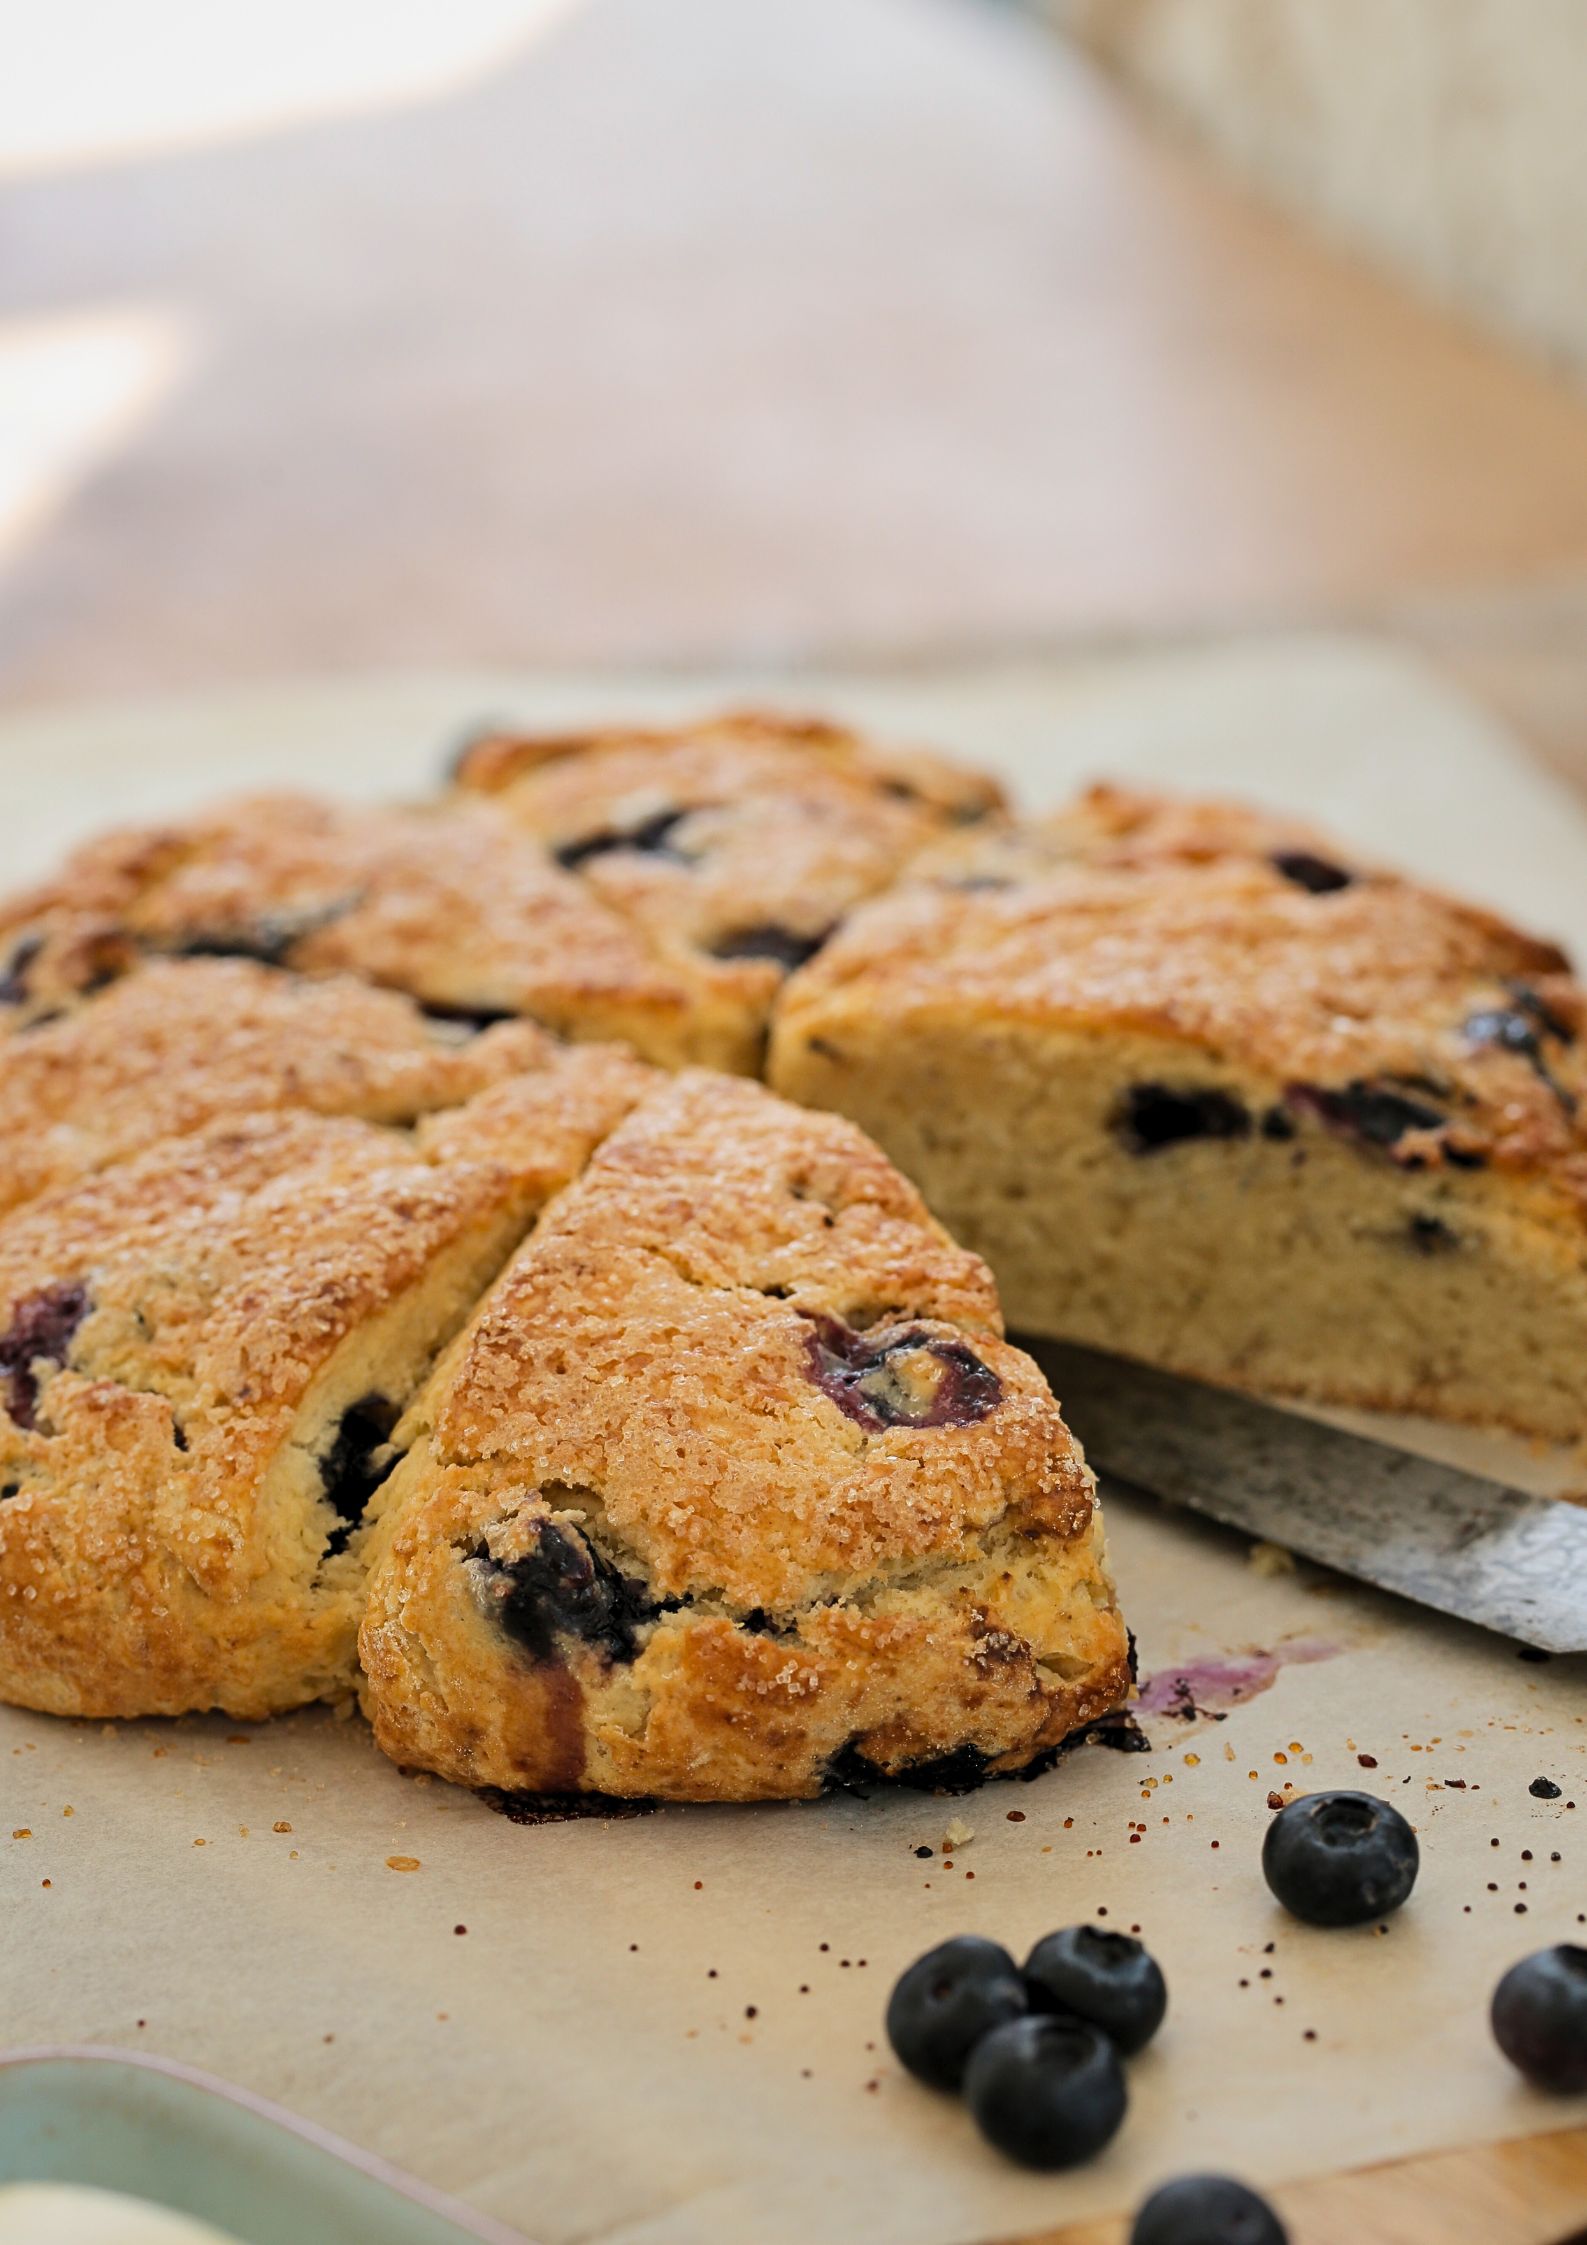 The easiest blueberry scones, made in one bowl with a few simple ingredients. They have a wonderful sugary, crunchy top and are served with an easy homemade blueberry jam and whipped vegan cream for the perfect afternoon tea treat! #veganscones #blueberryscones #eggfree #blueberryjam